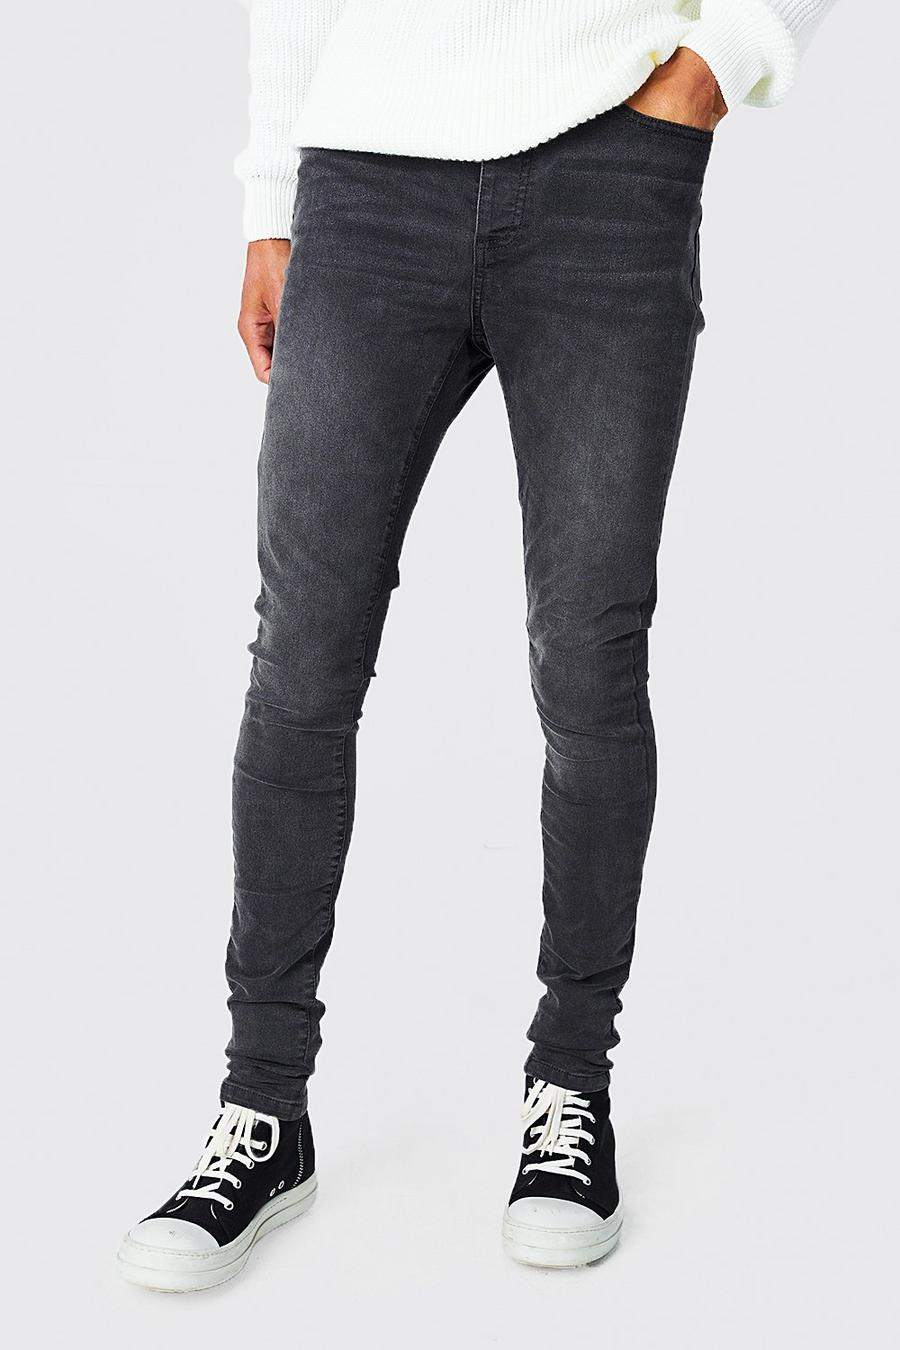 Charcoal gris Tall Skinny Stretch Jeans